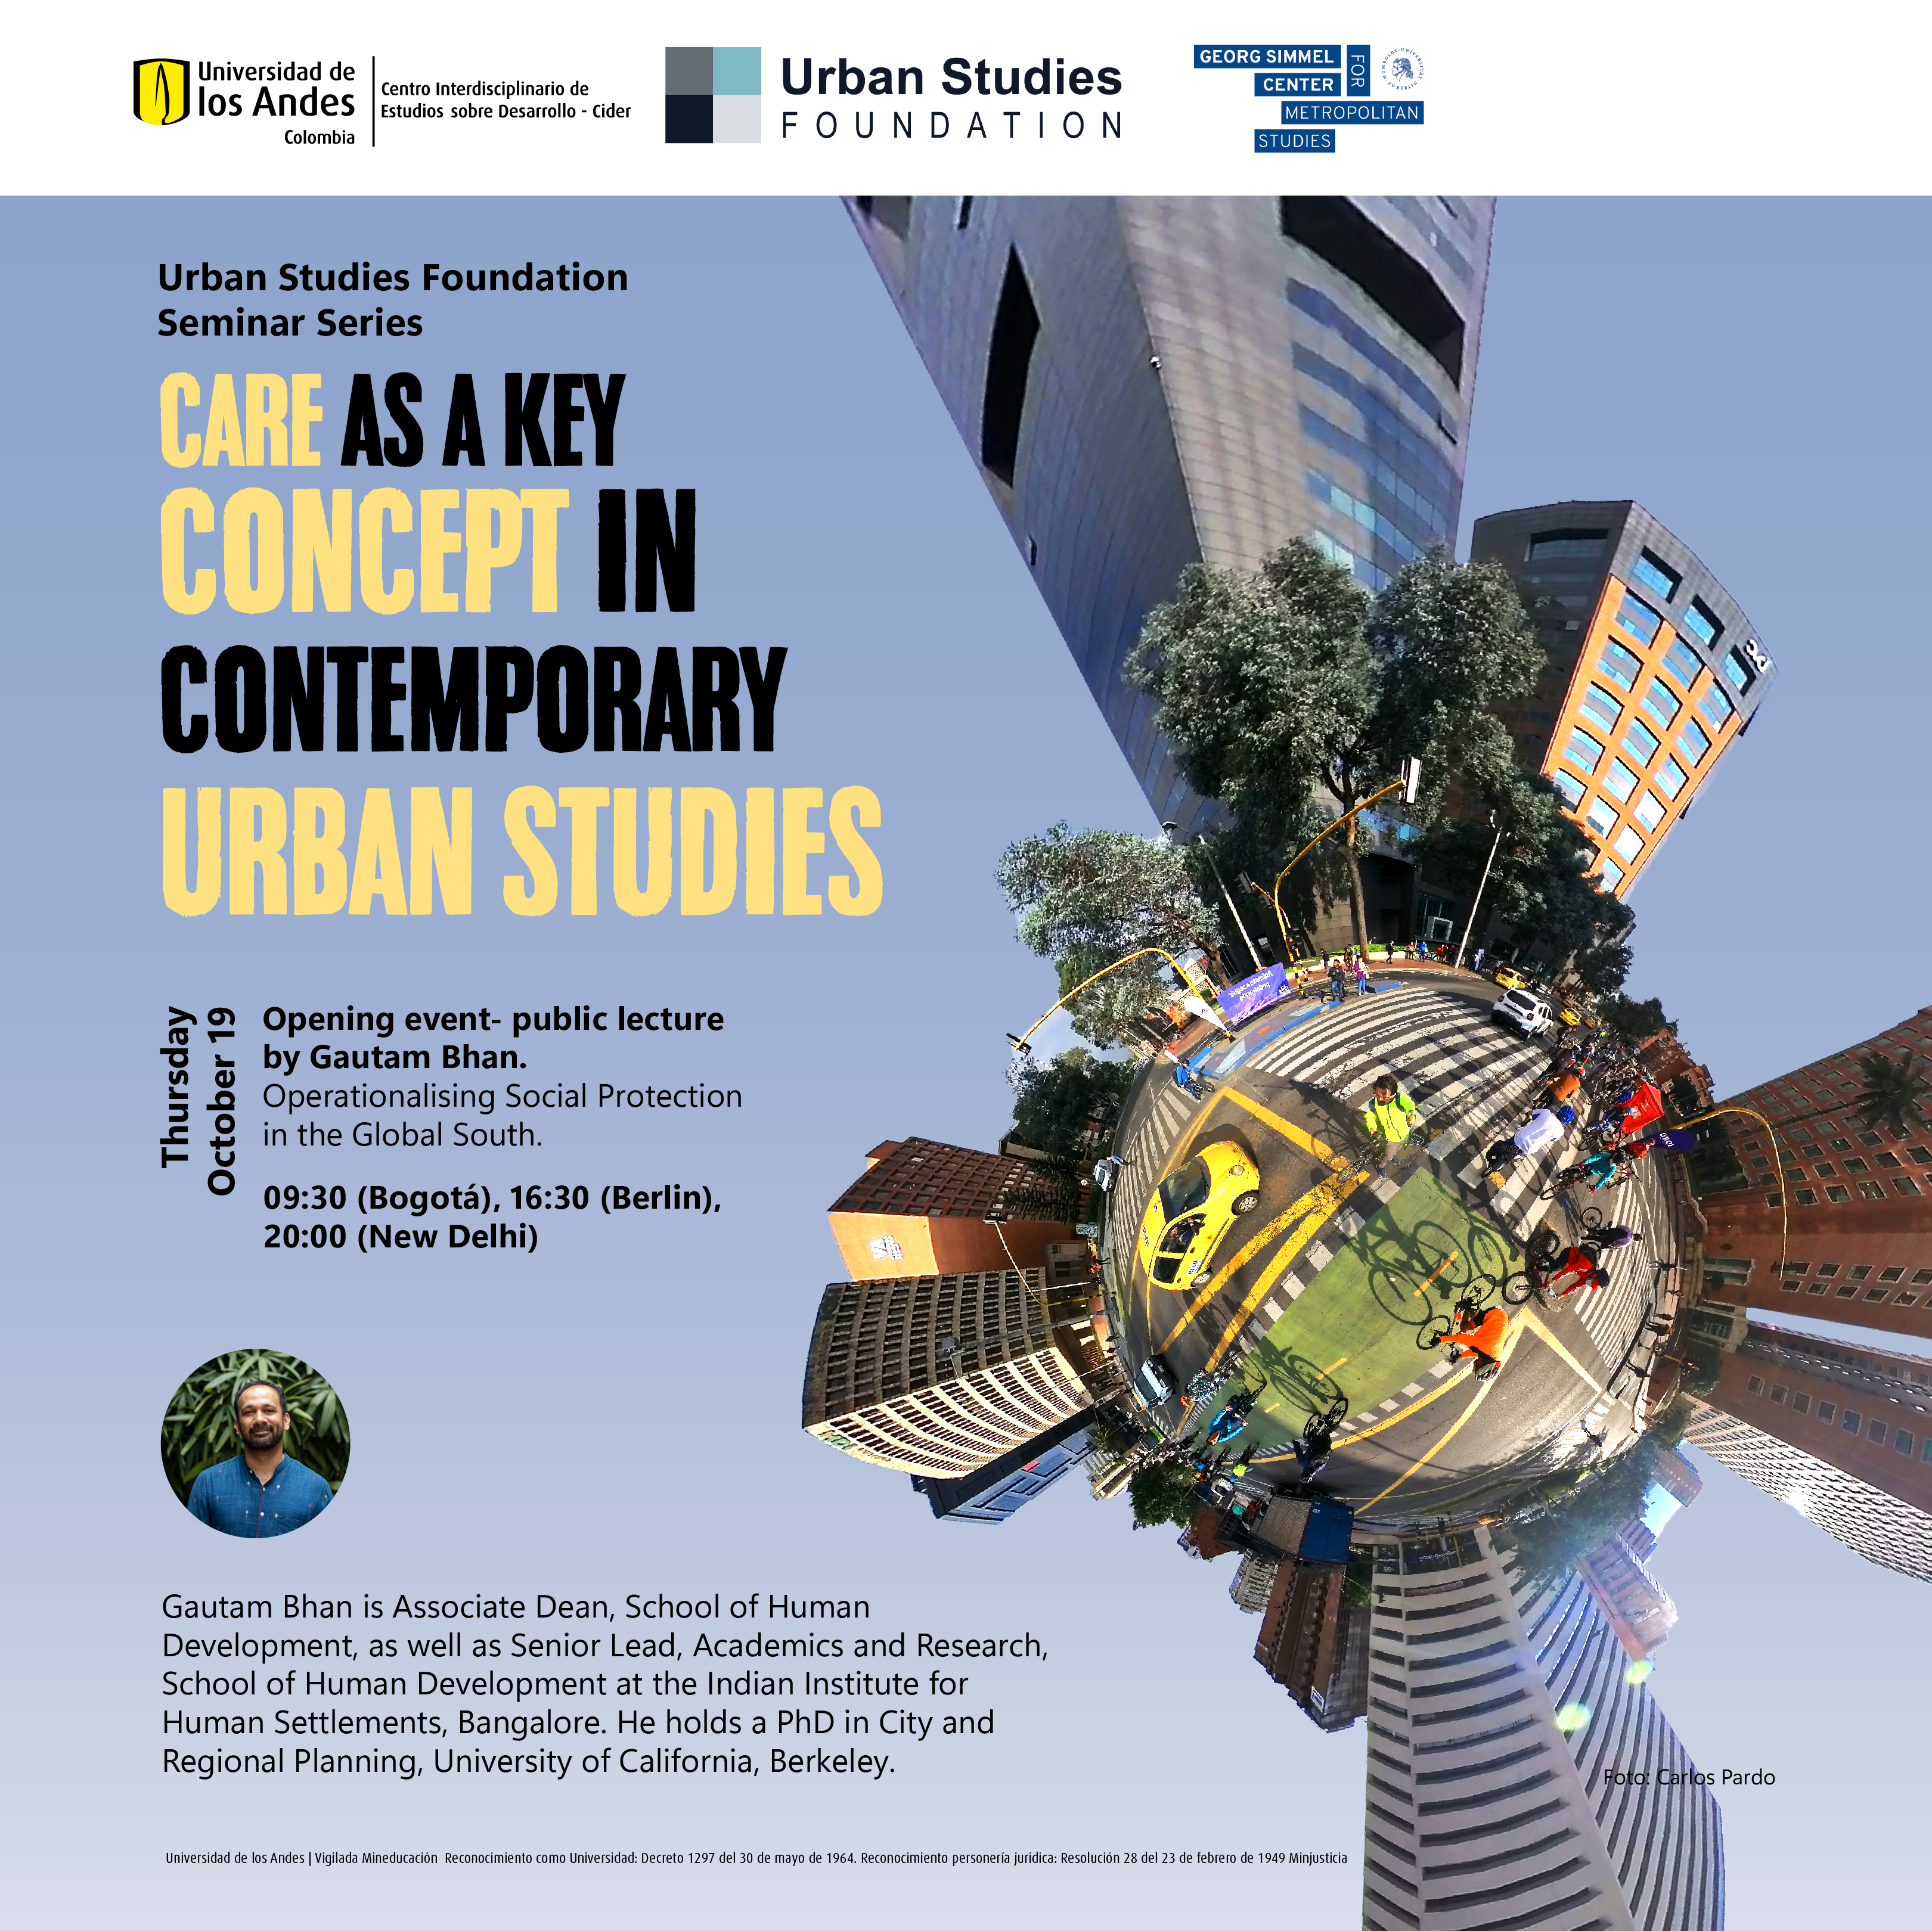 Care as a key concept in contemporary urban studies